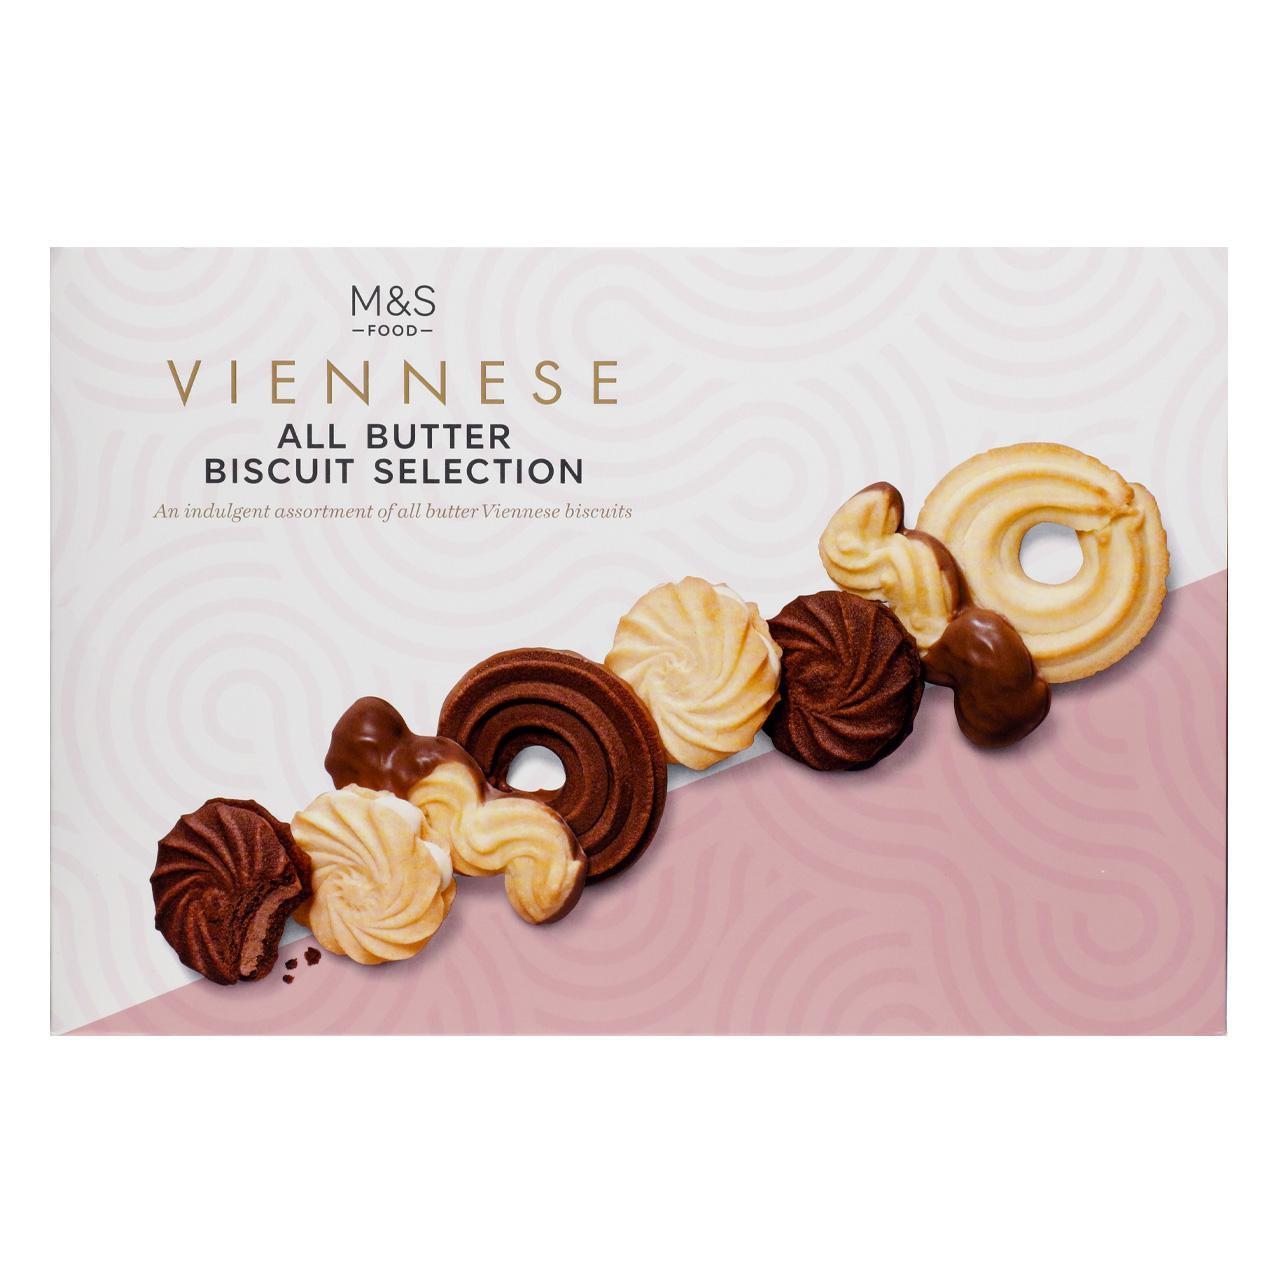 M&S All Butter Viennese Biscuit Selection